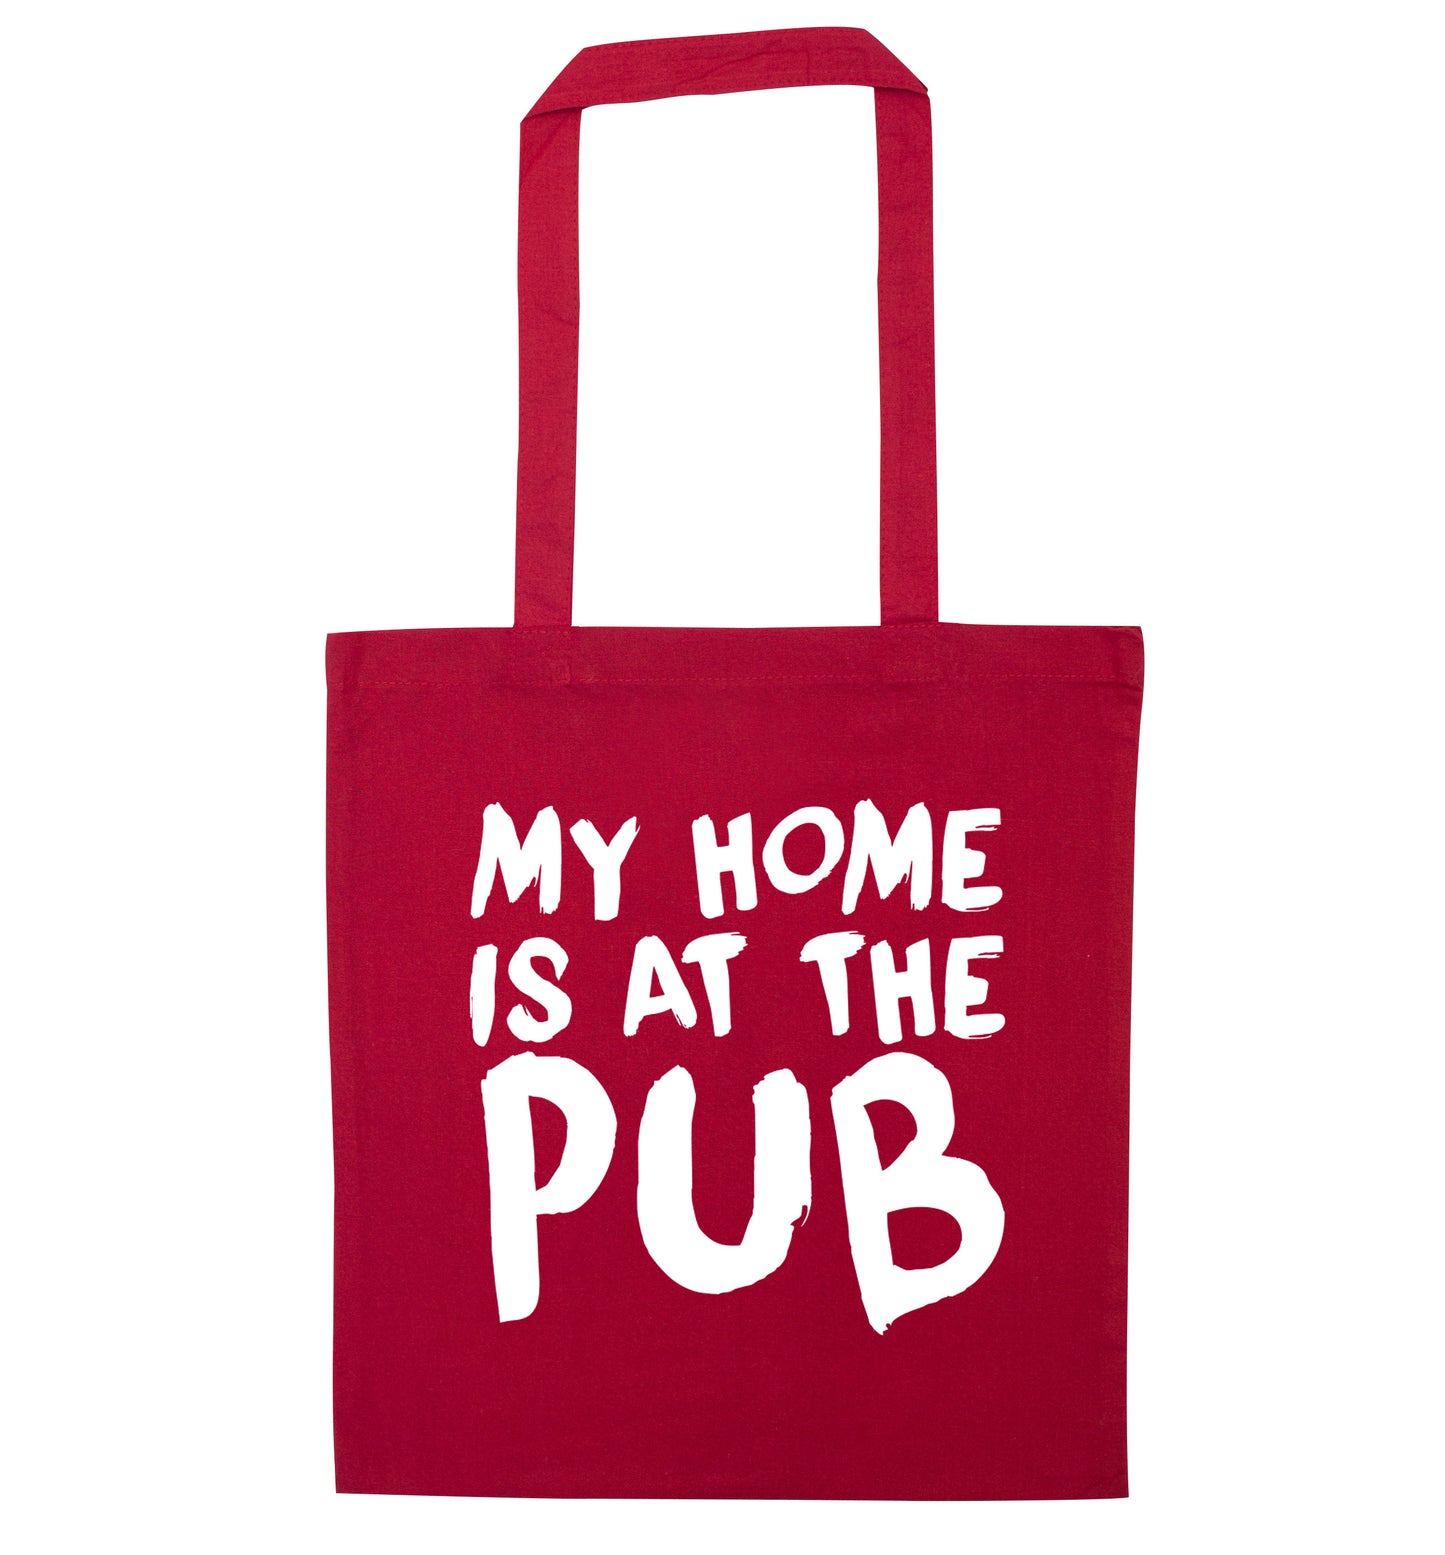 My home is at the pub red tote bag